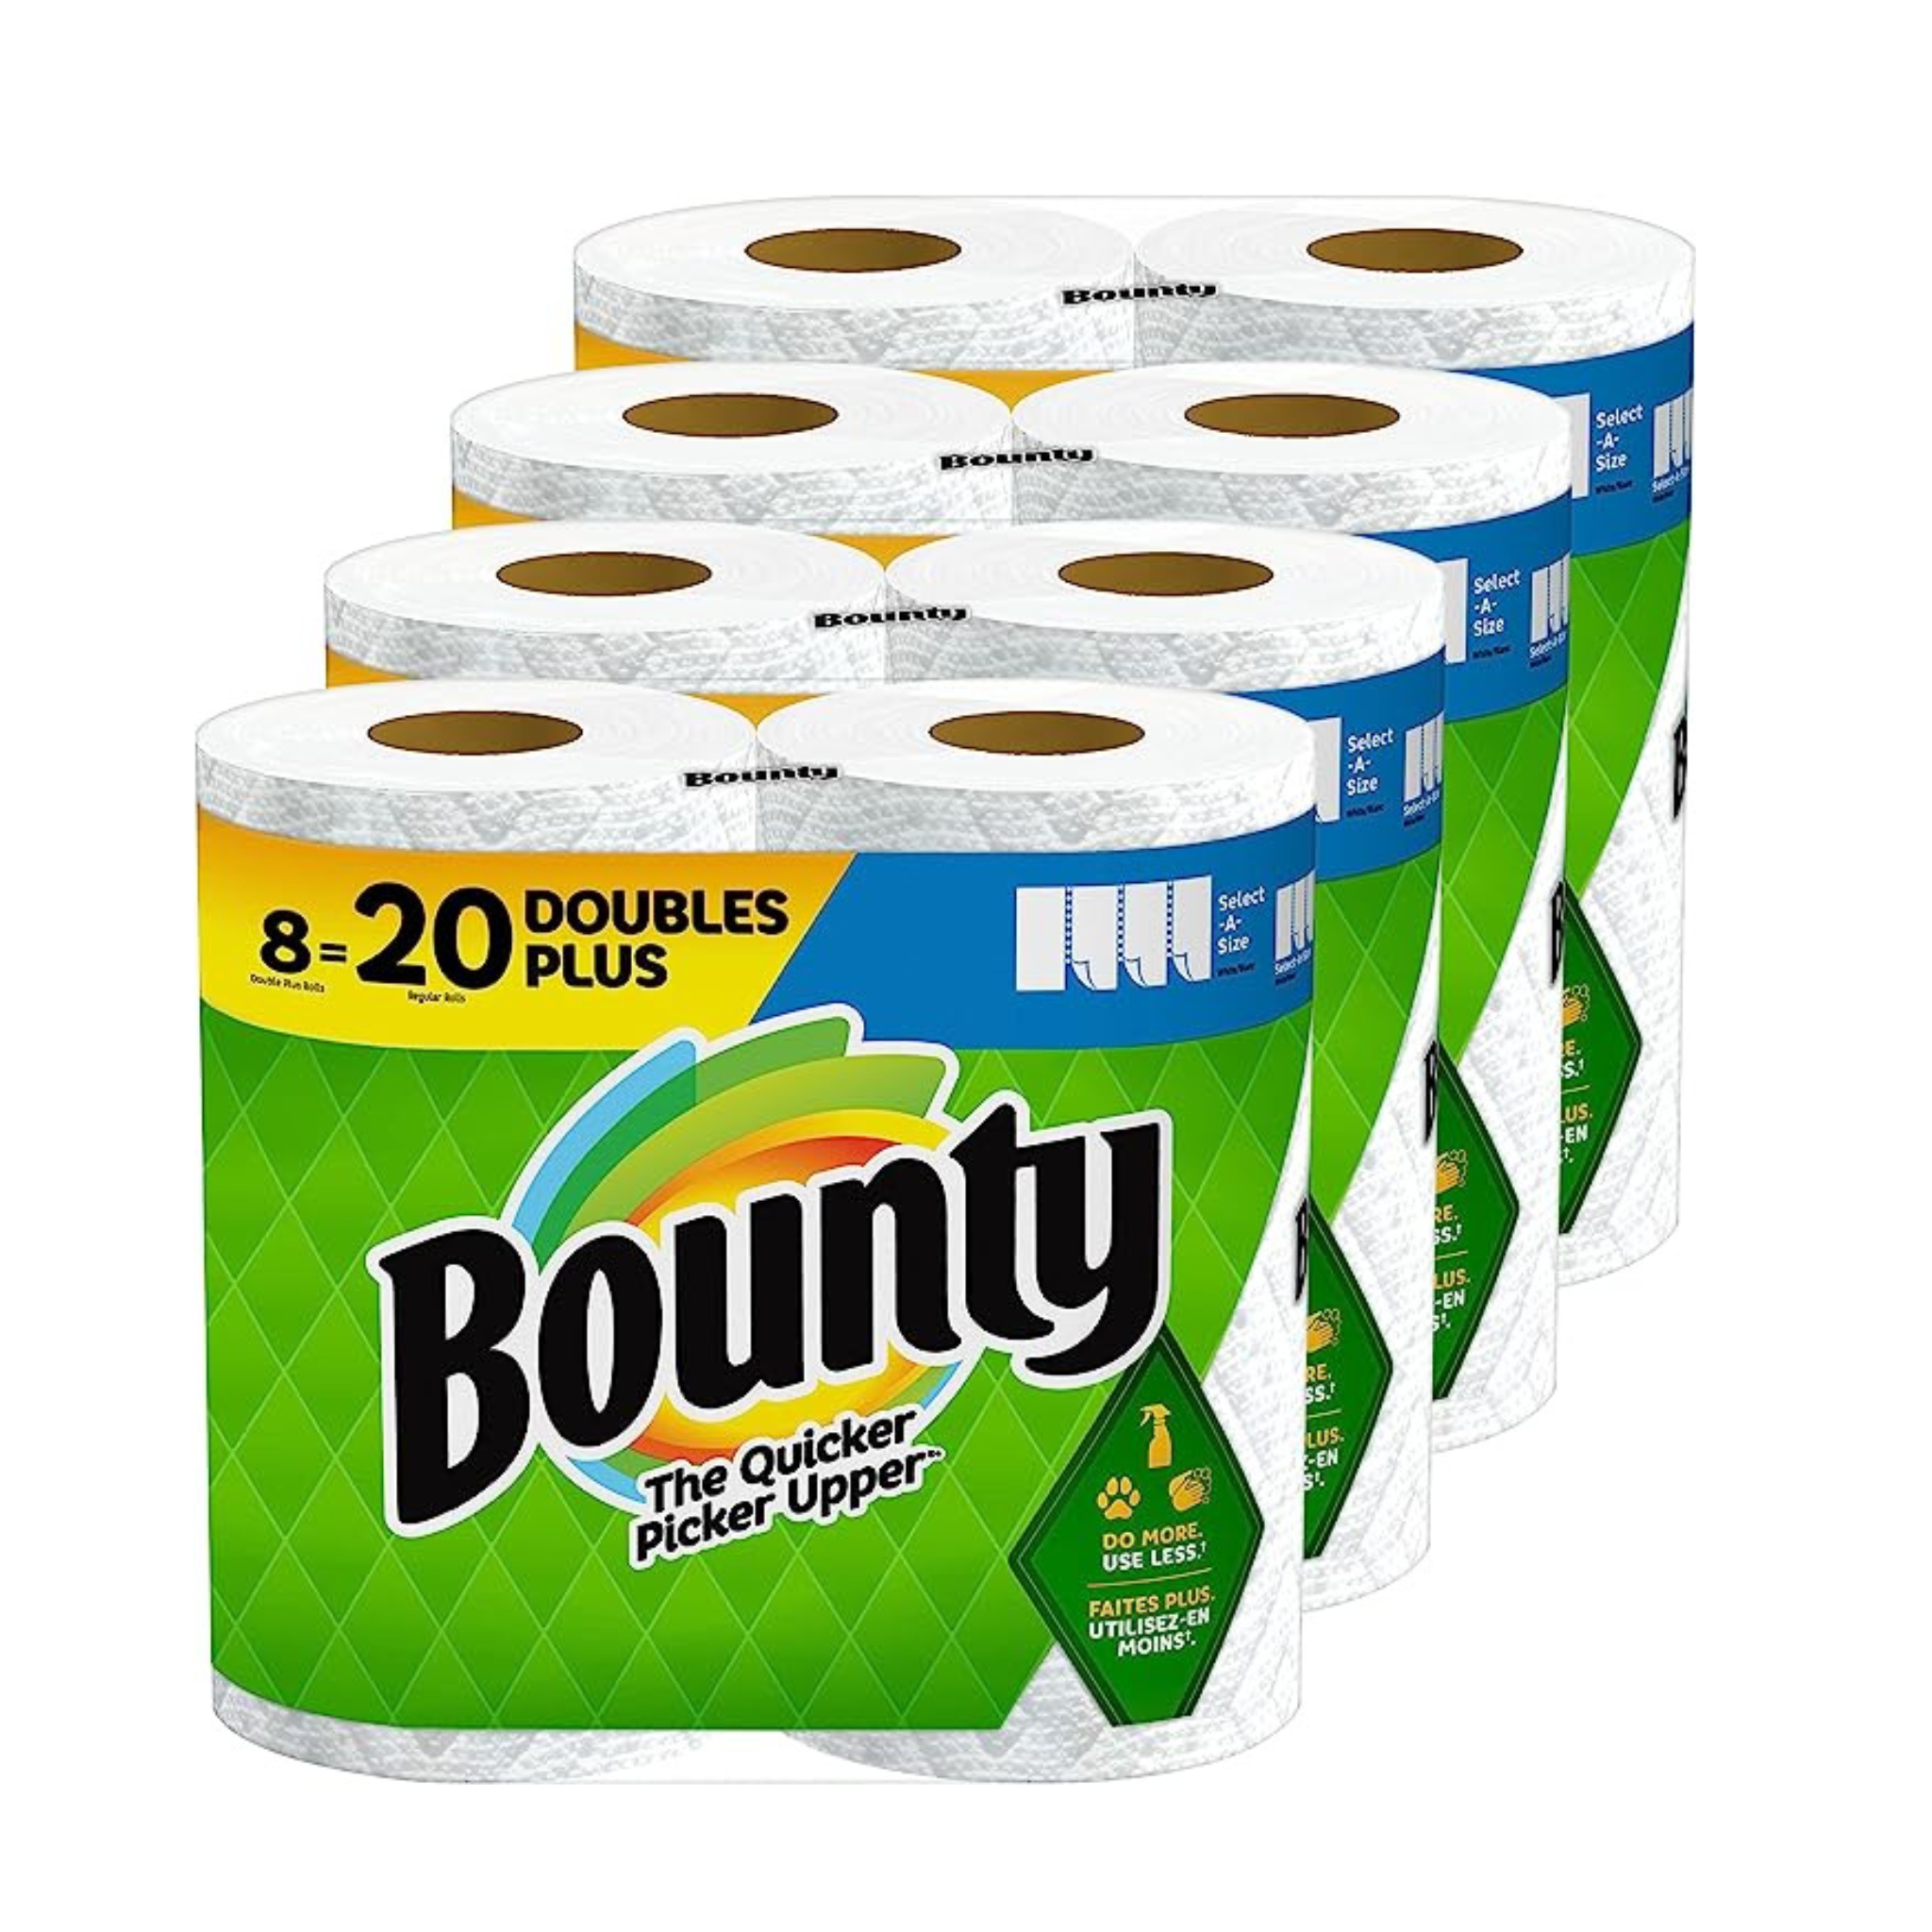 8 Double Plus, 18 Regular, Rolls Of Bounty Select-A-Size Paper Towels